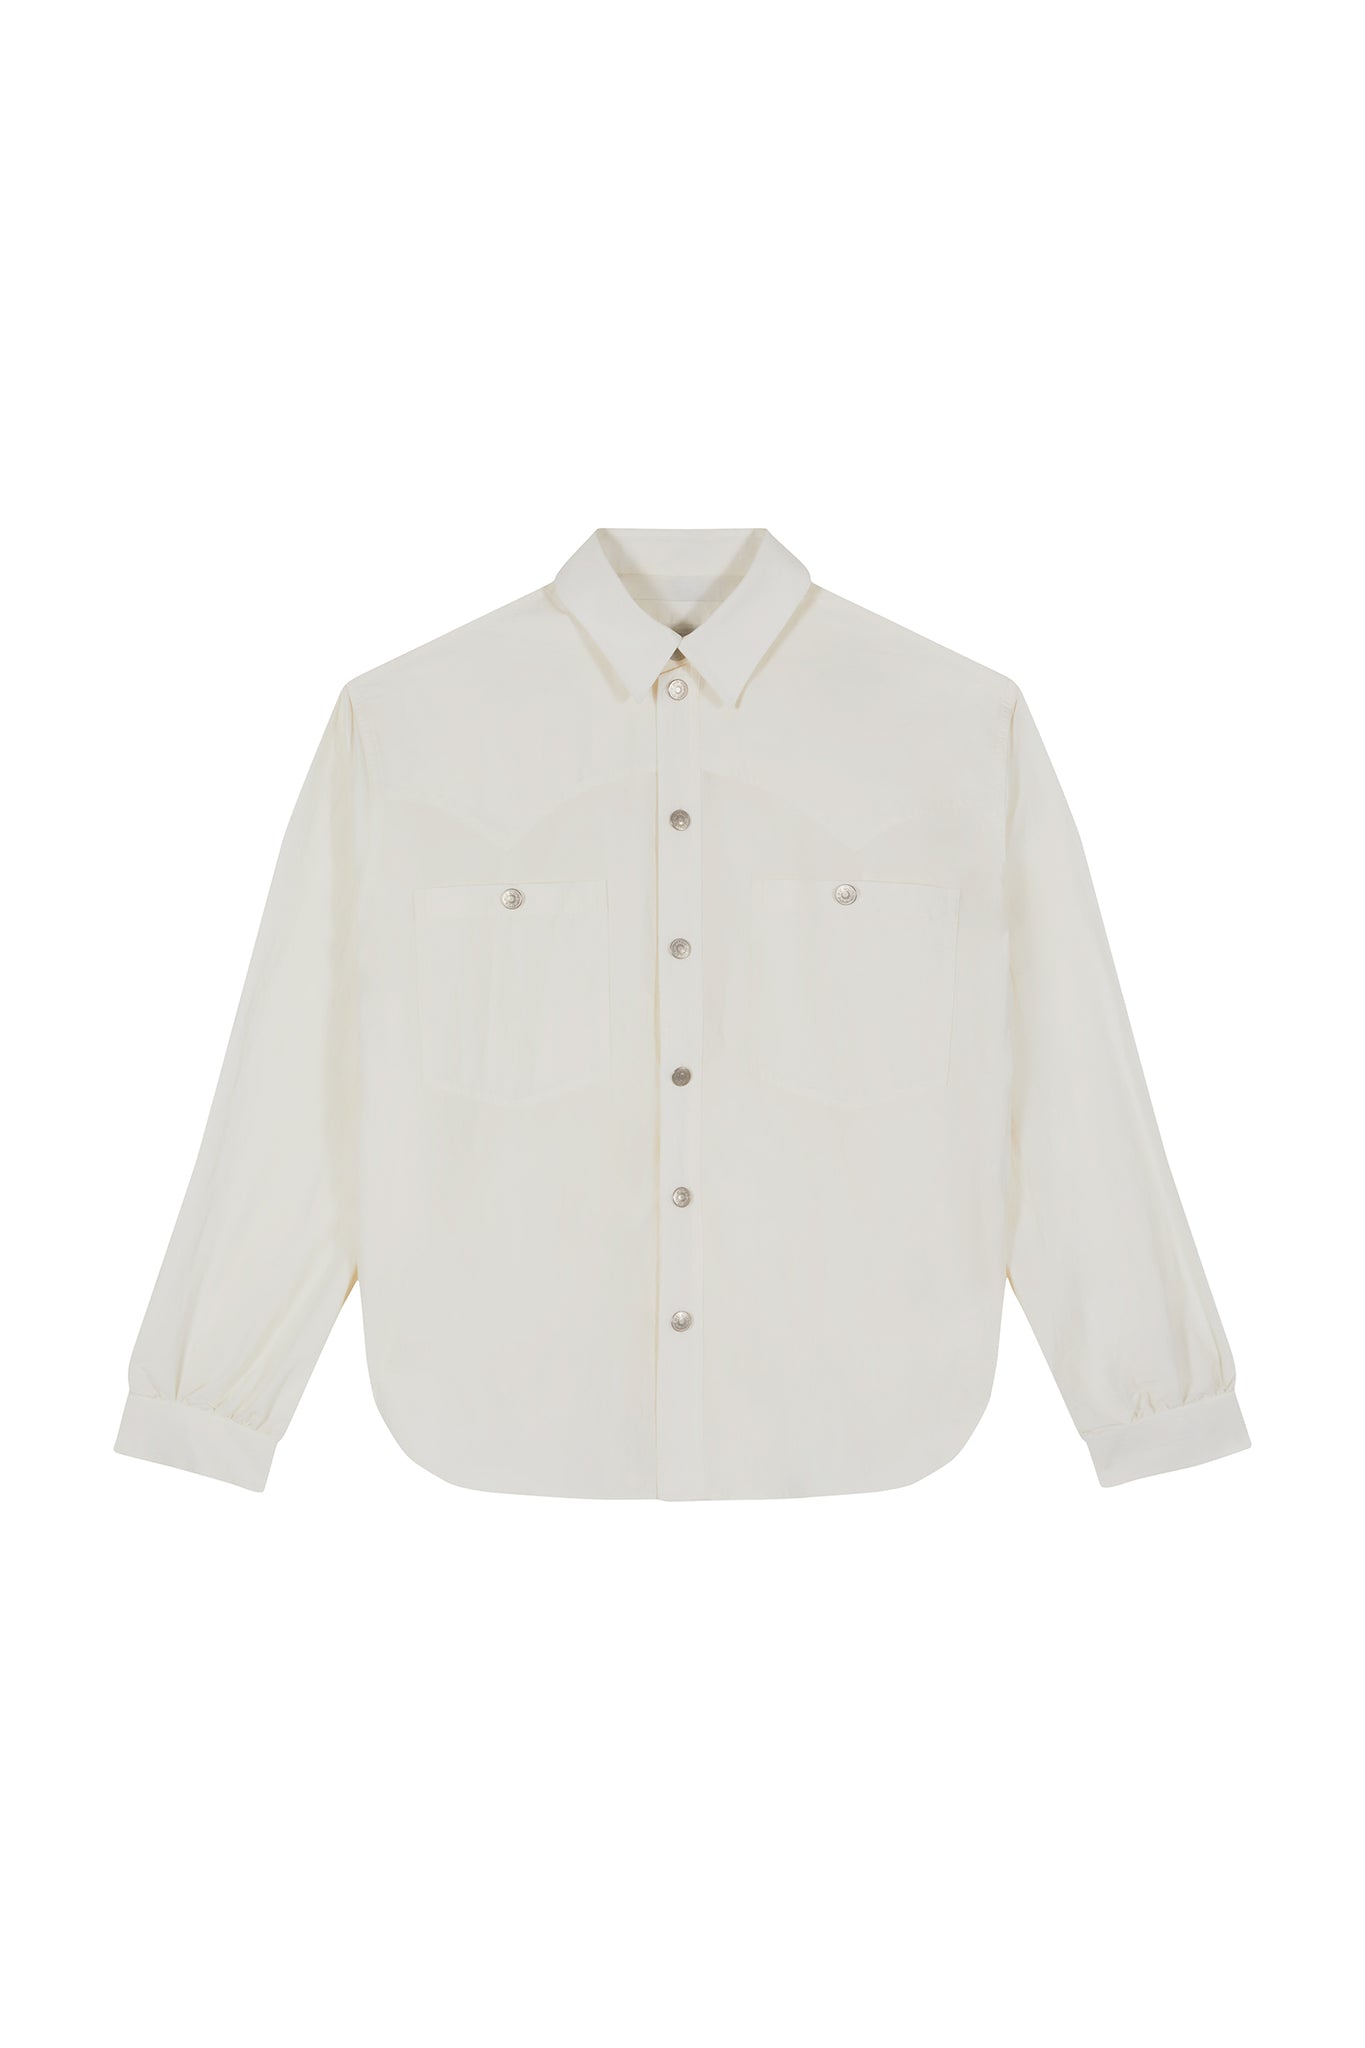 THE WESTERN SHIRT IN OFF-WHITE COMPACT NYLON POPLIN